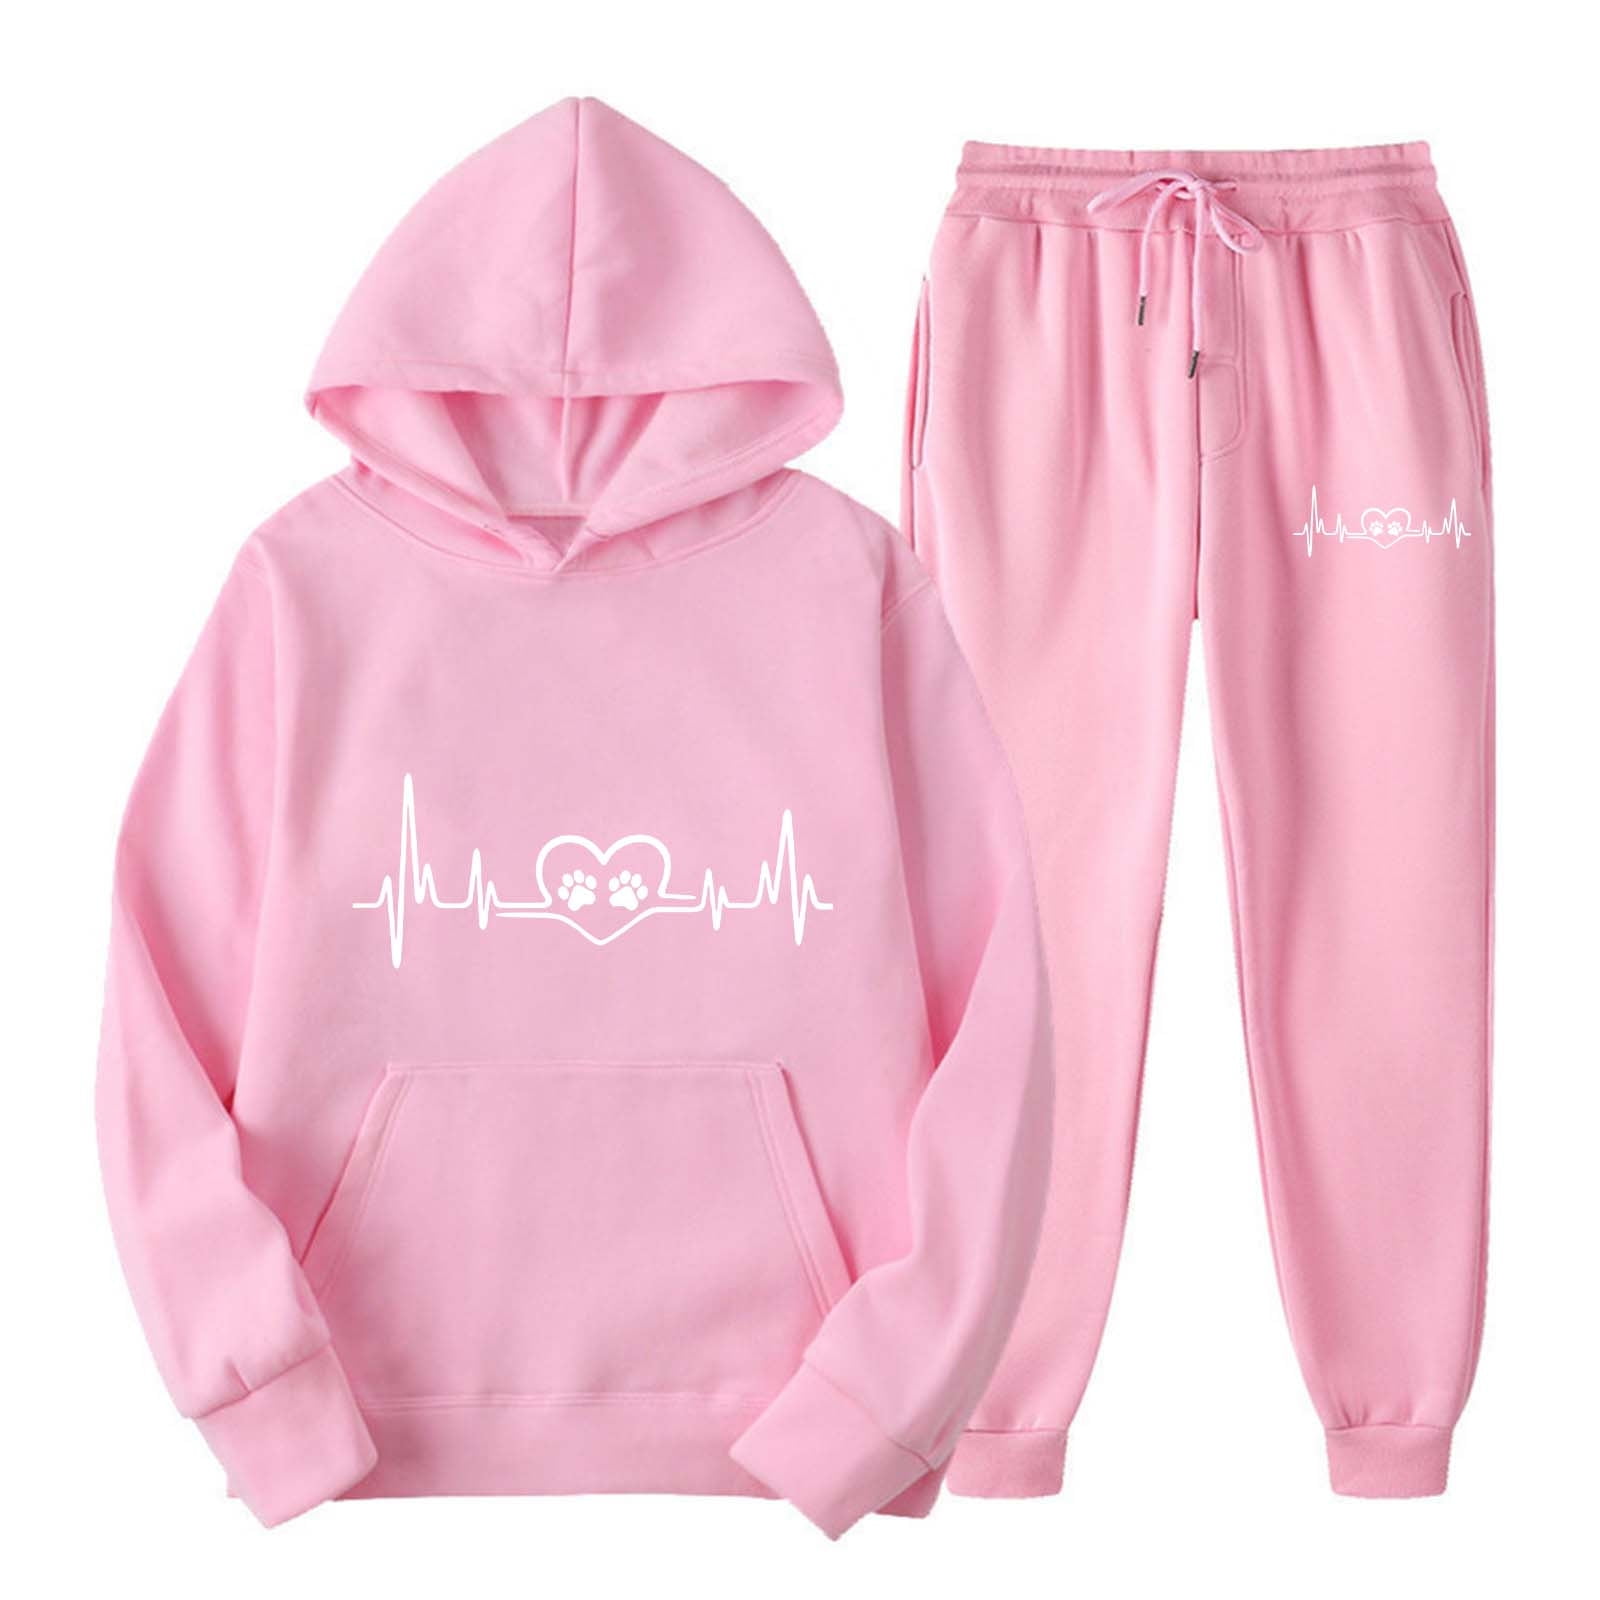 Aboser Women Sweatsuits Sets Matching Jogging Suits Funny